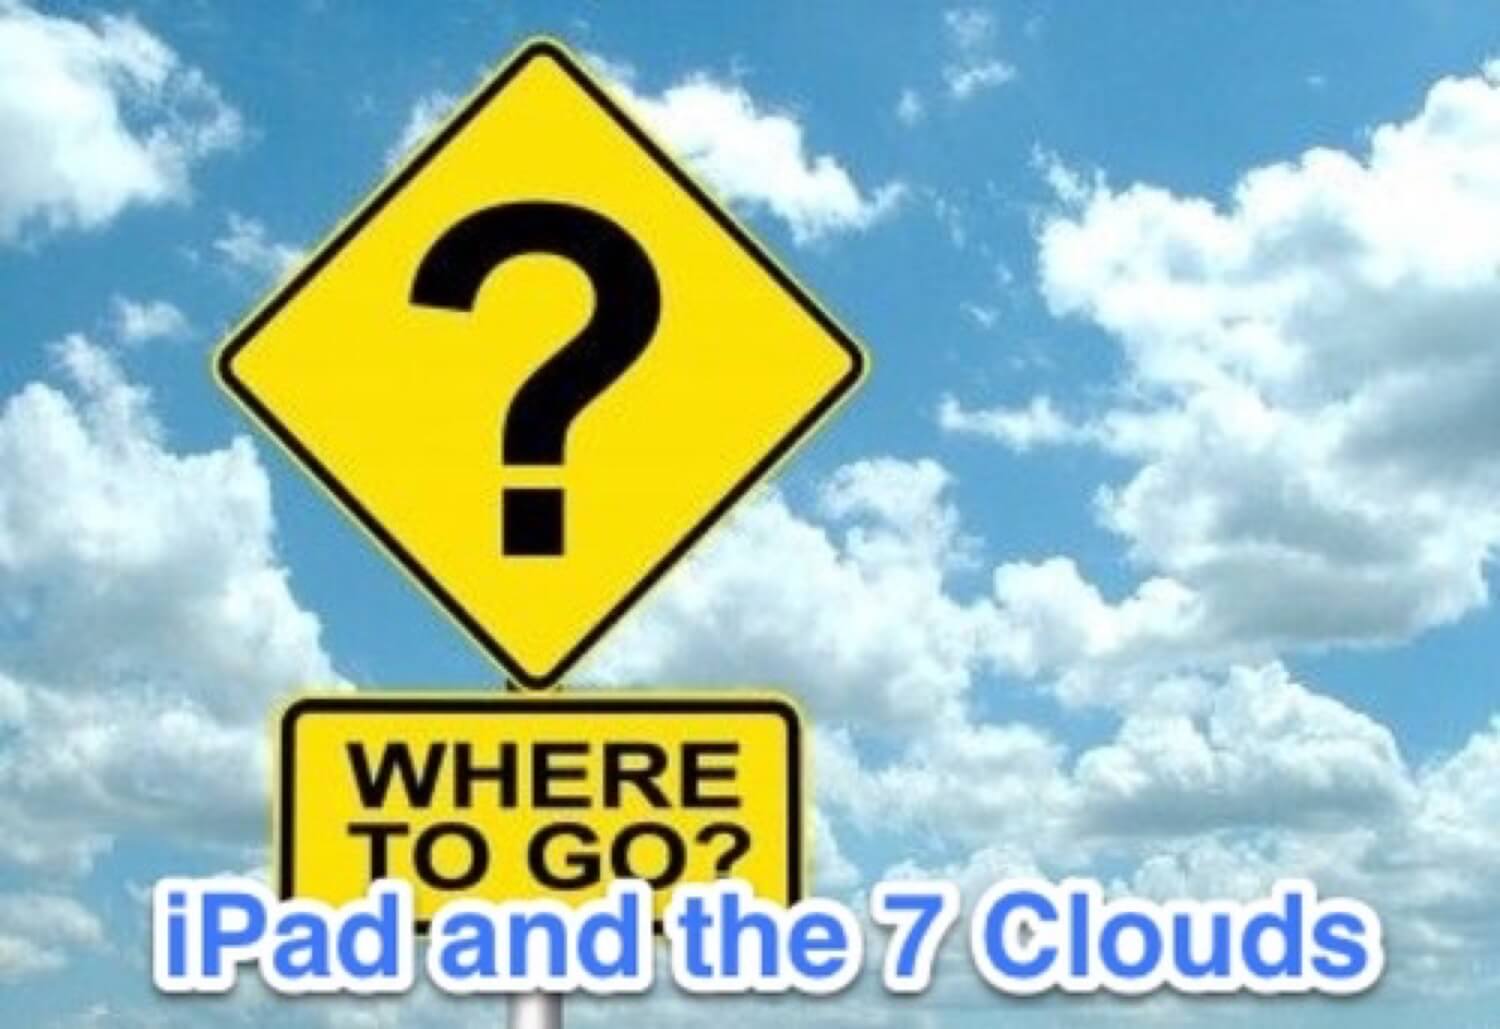 Part 1 - the Clouds - iPad as my main computer